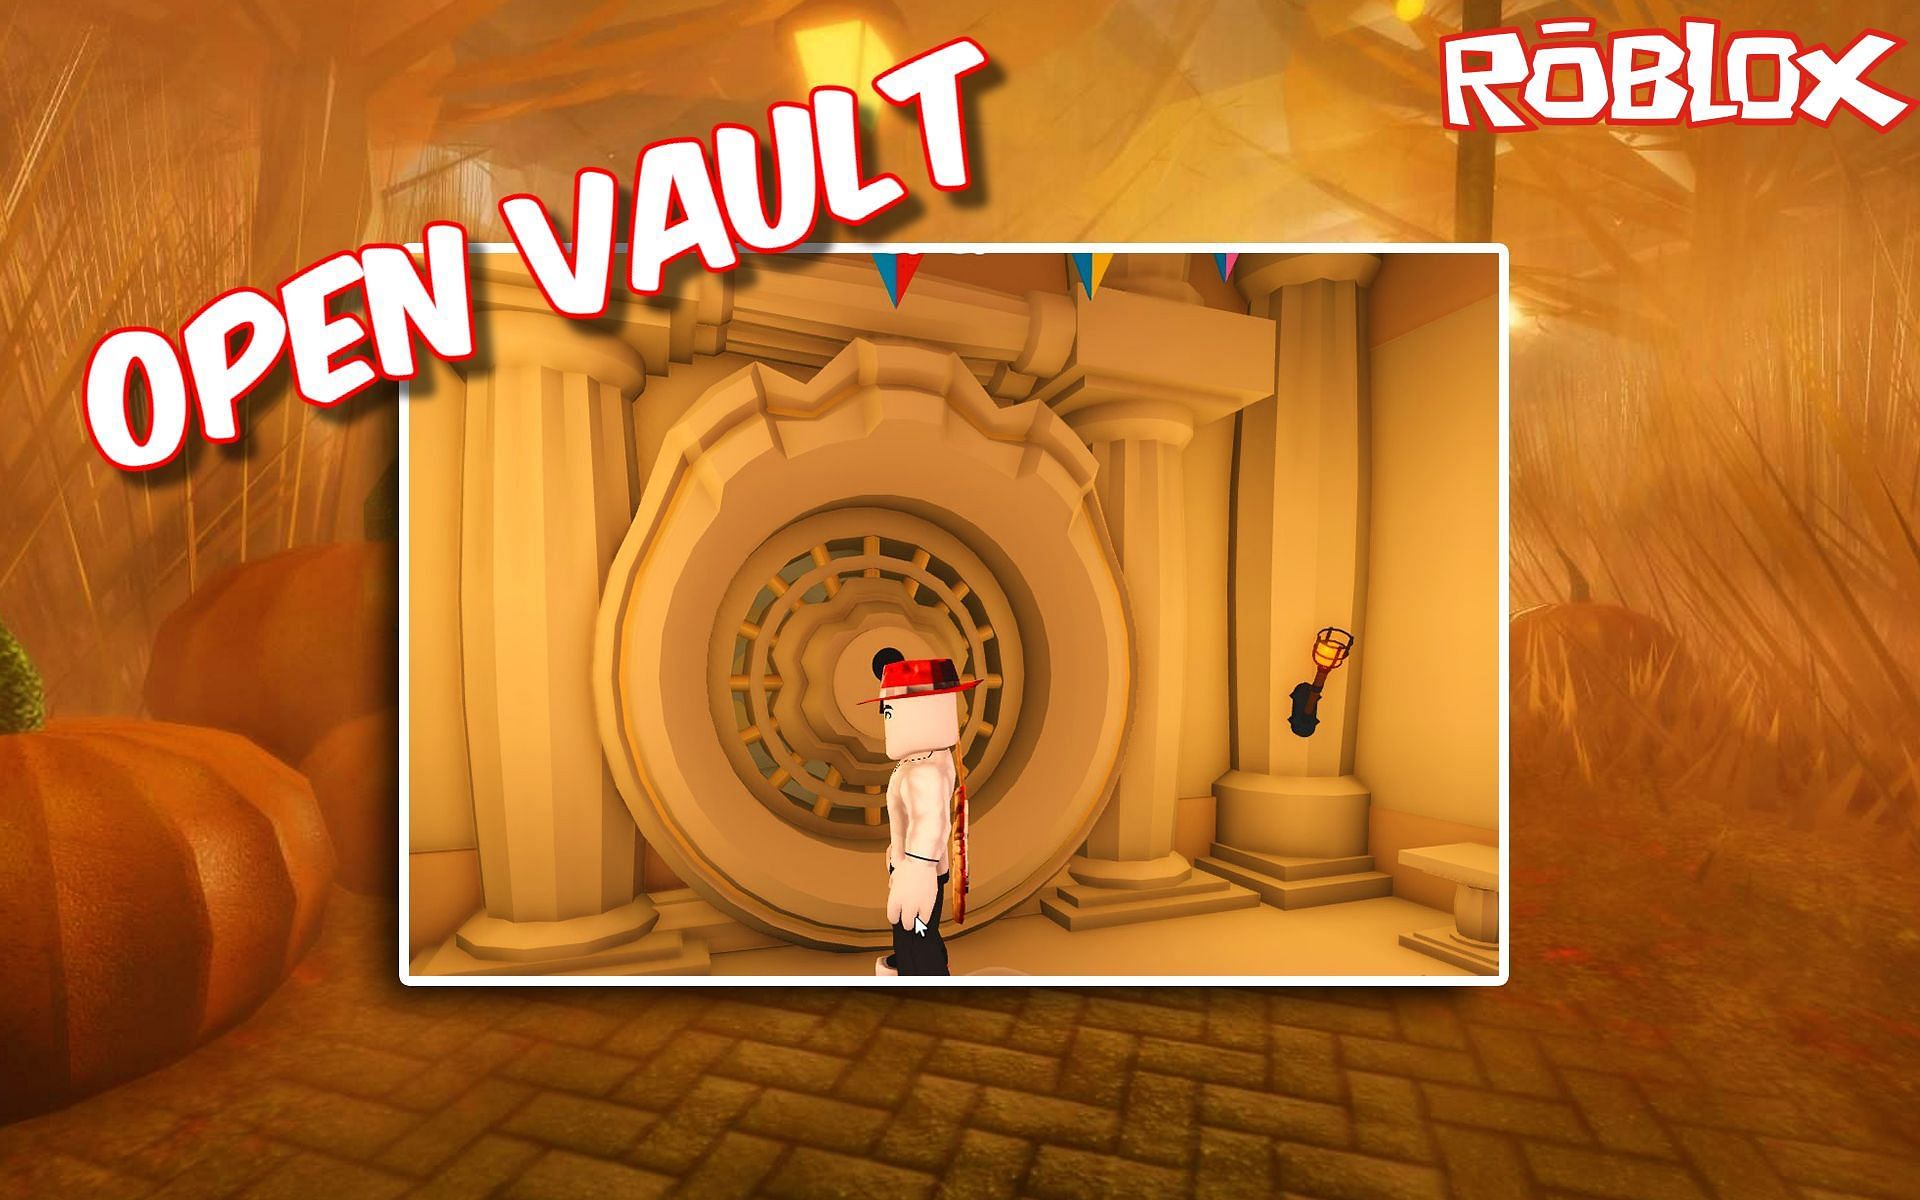 Many users wonder how they can get into the vault present in Adopt Me! (Image via Sportskeeeda)